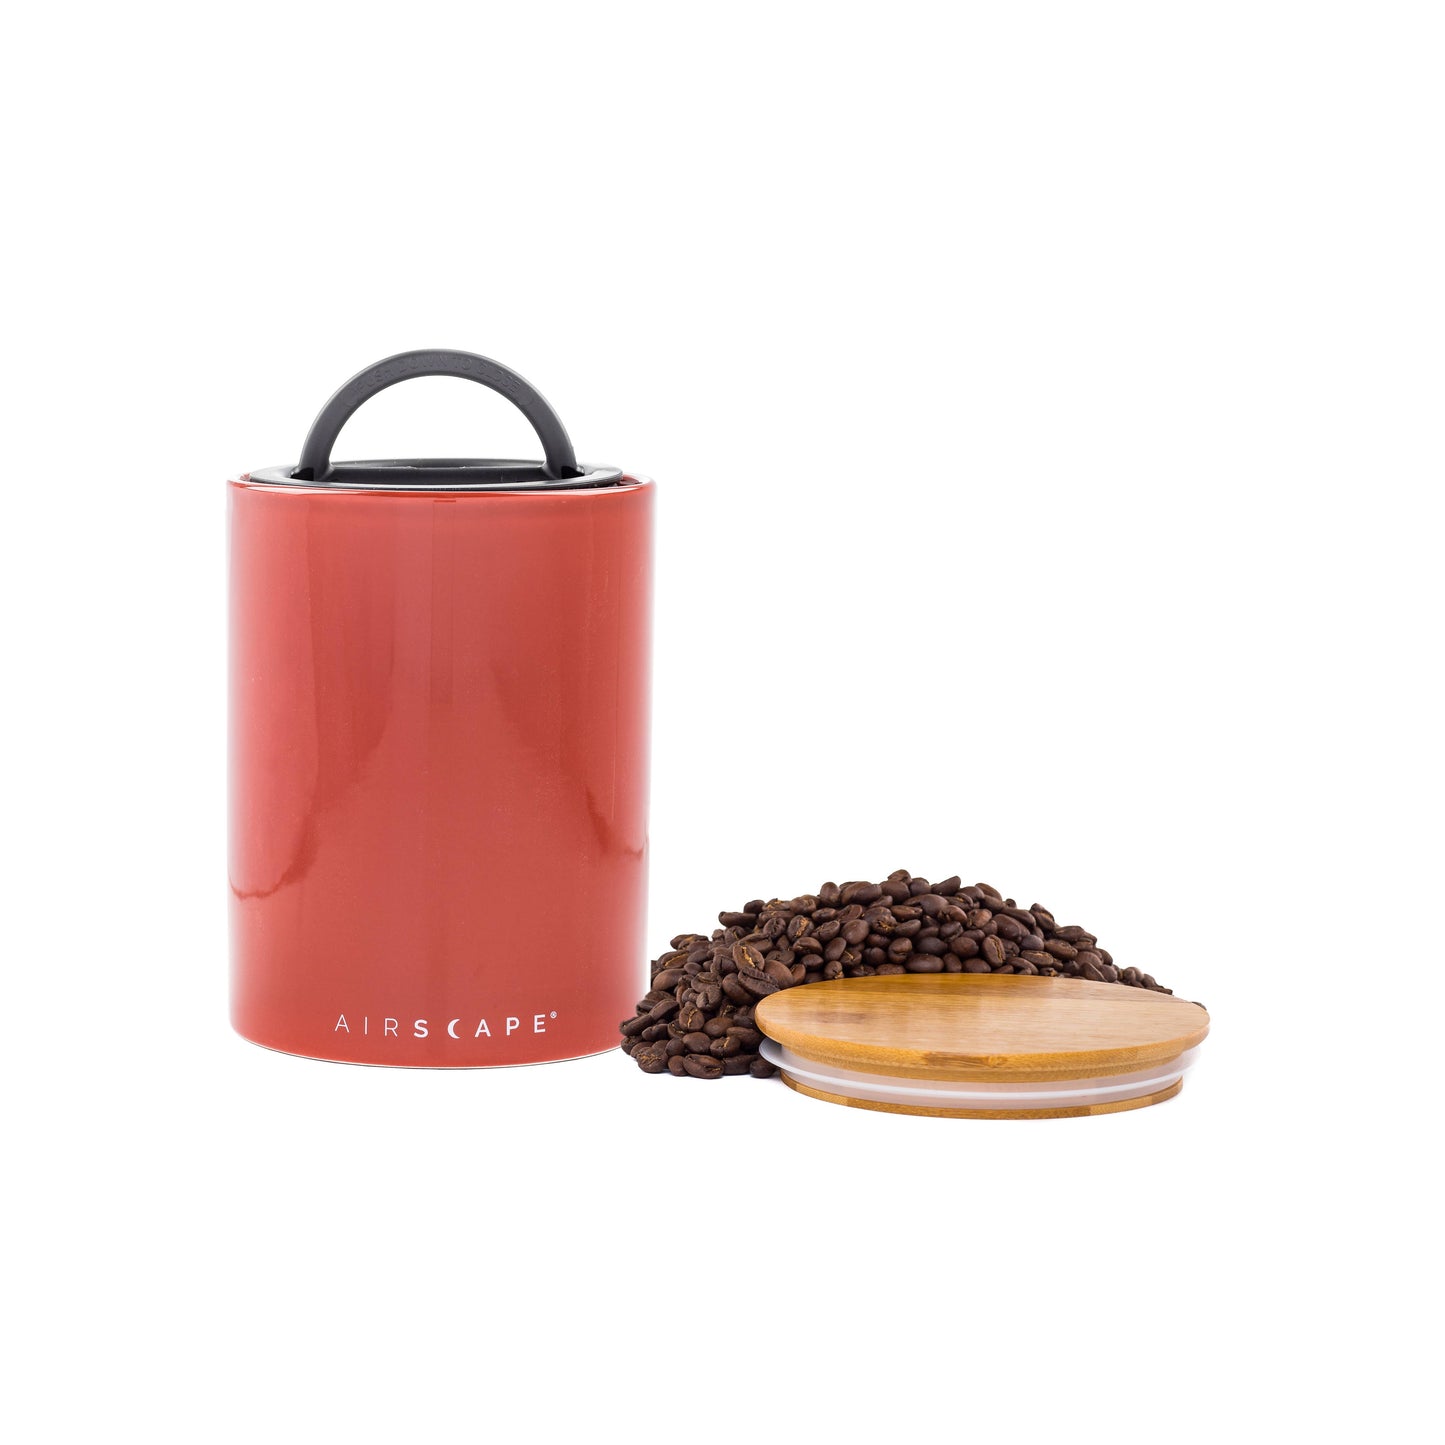 Airscape Ceramic Canister 500 g - Coffee Coaching Club